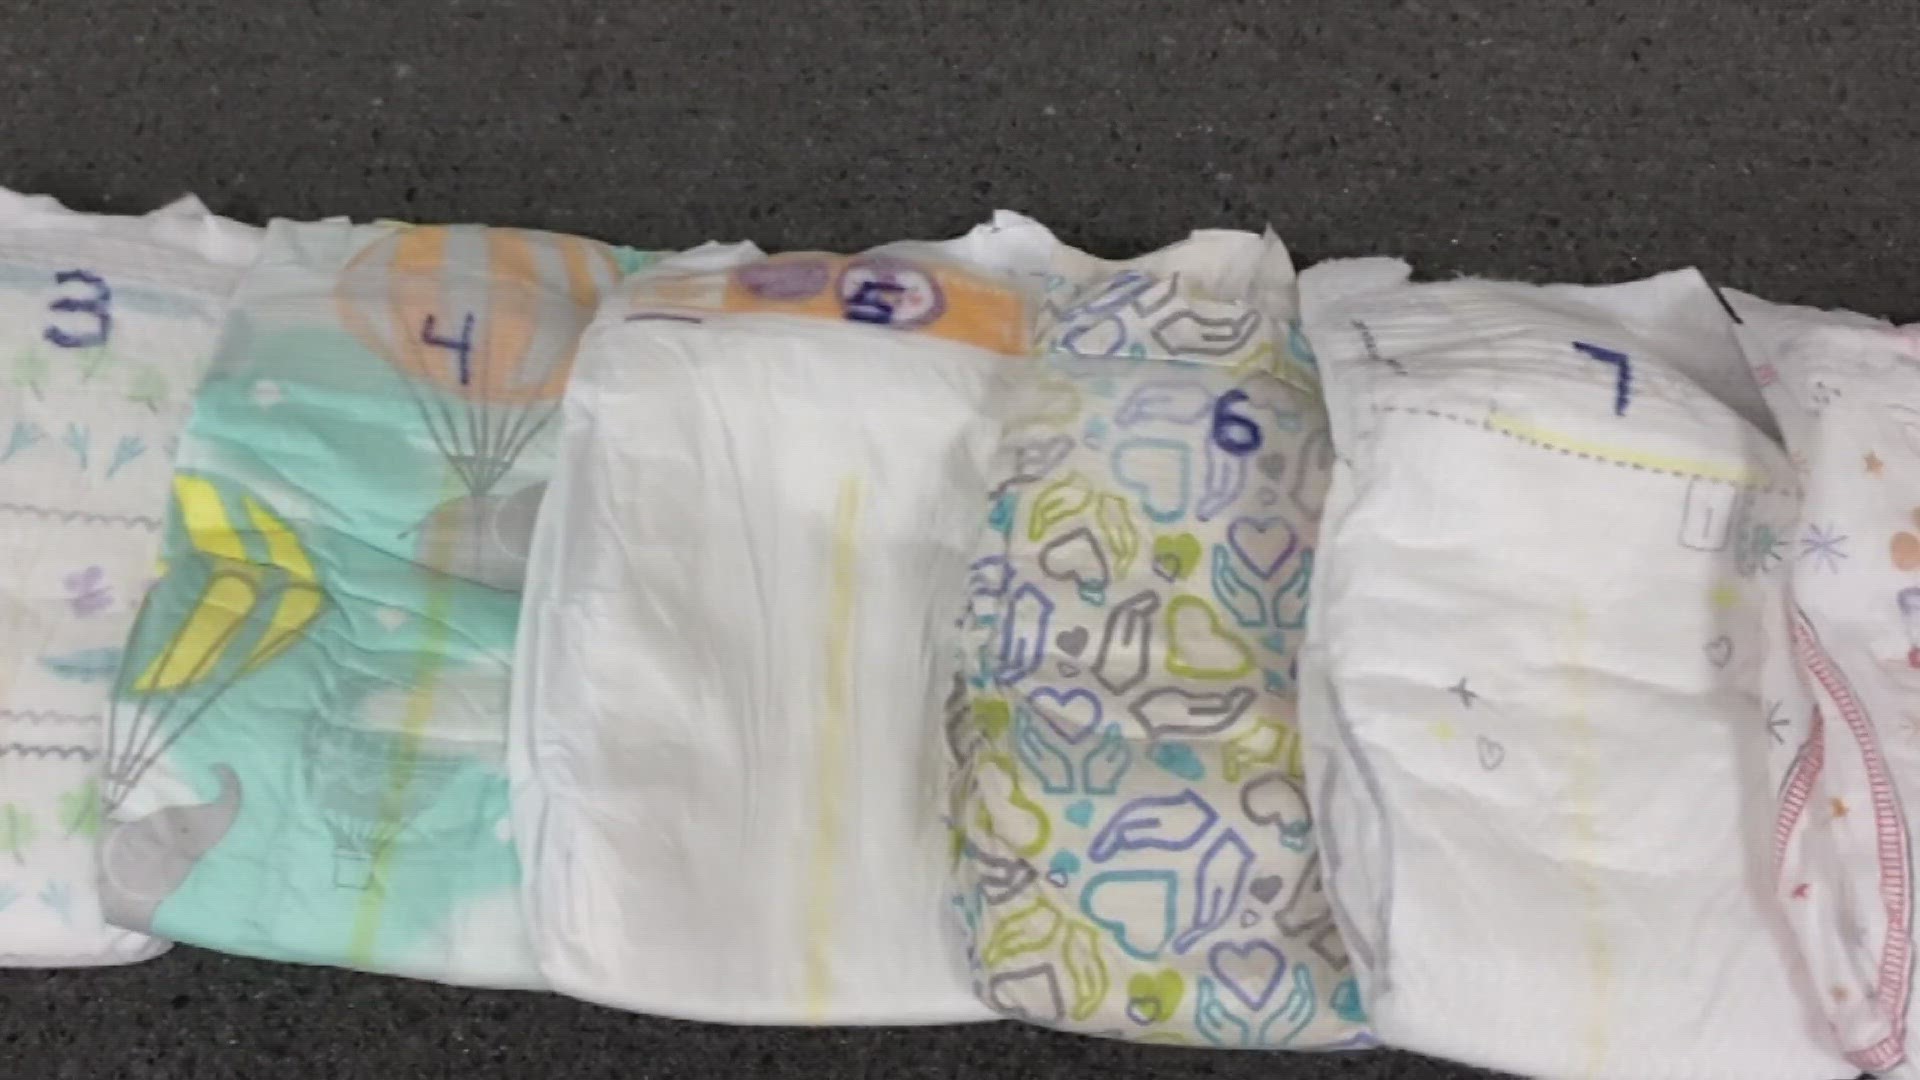 Consumer Reports recently tested 10 popular diaper brands to find out which ones are the most absorbent and which ones keep your baby feeling dry.